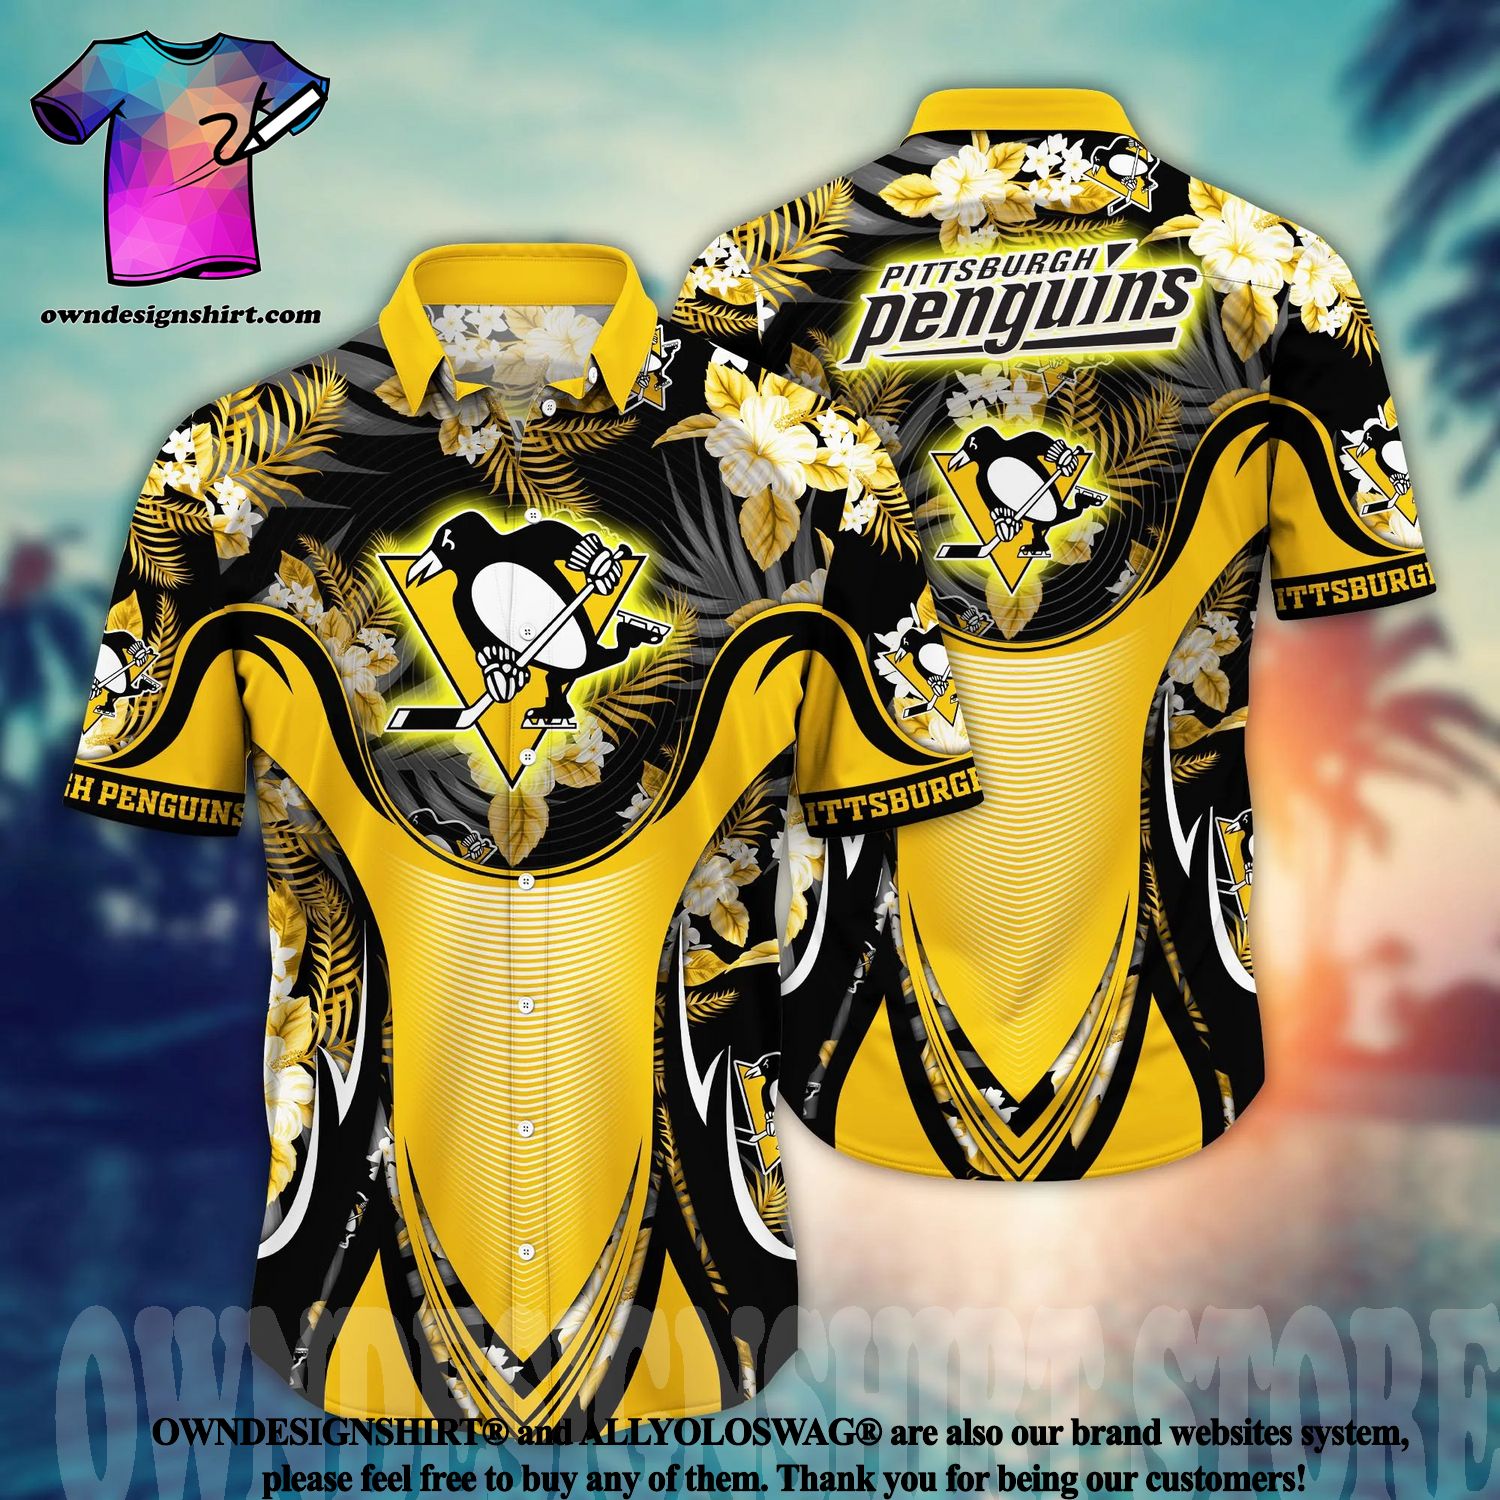 Pittsburgh Penguins iconic apparel